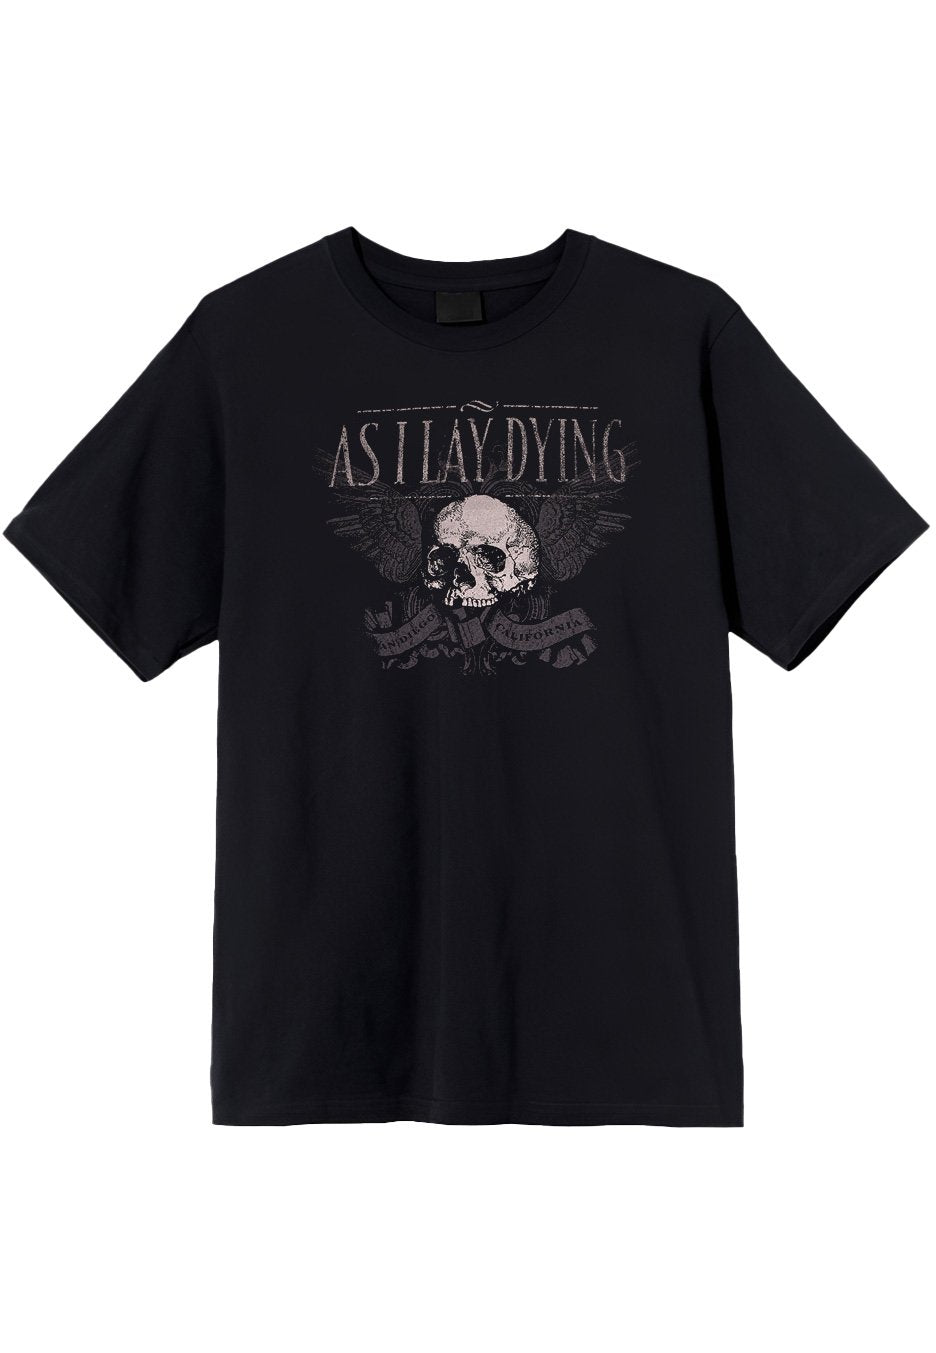 As I Lay Dying - Banner - T-Shirt